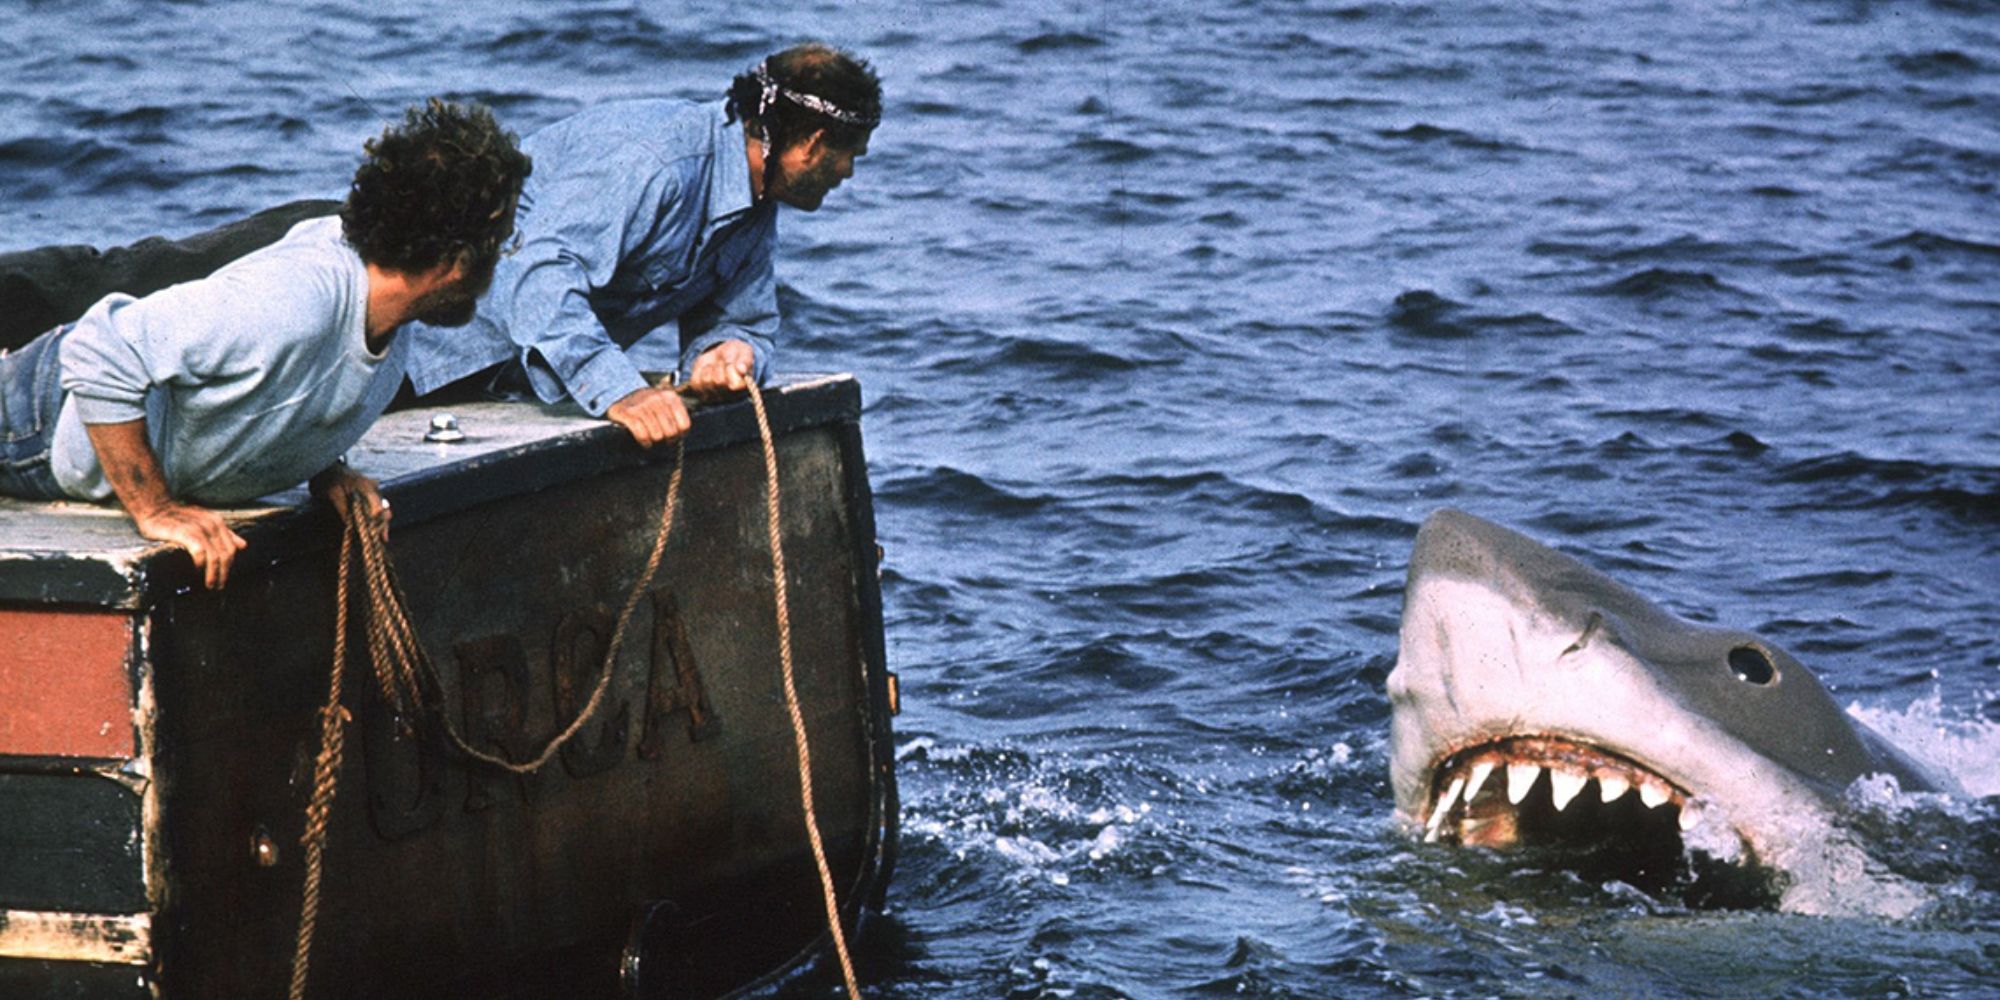 Bruce the shark rearing it's head above the water in still from 'Jaws'